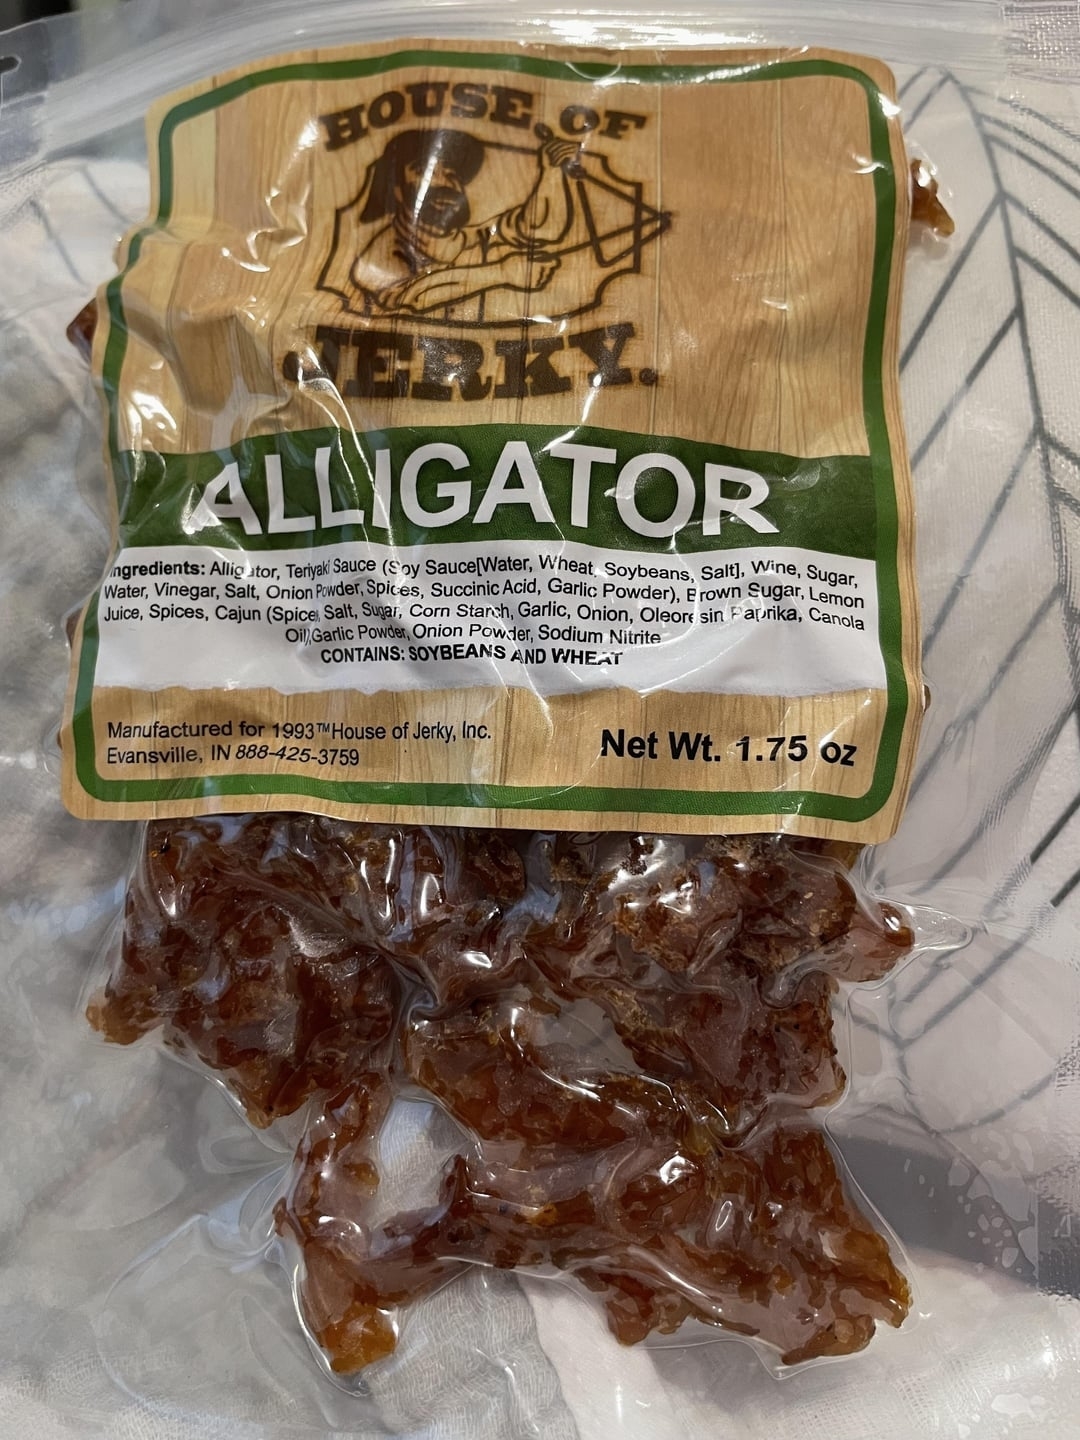 Package of &quot;HOUSE OF JERKY&quot; Alligator Jerky, 1.75 oz with ingredients and company contact info